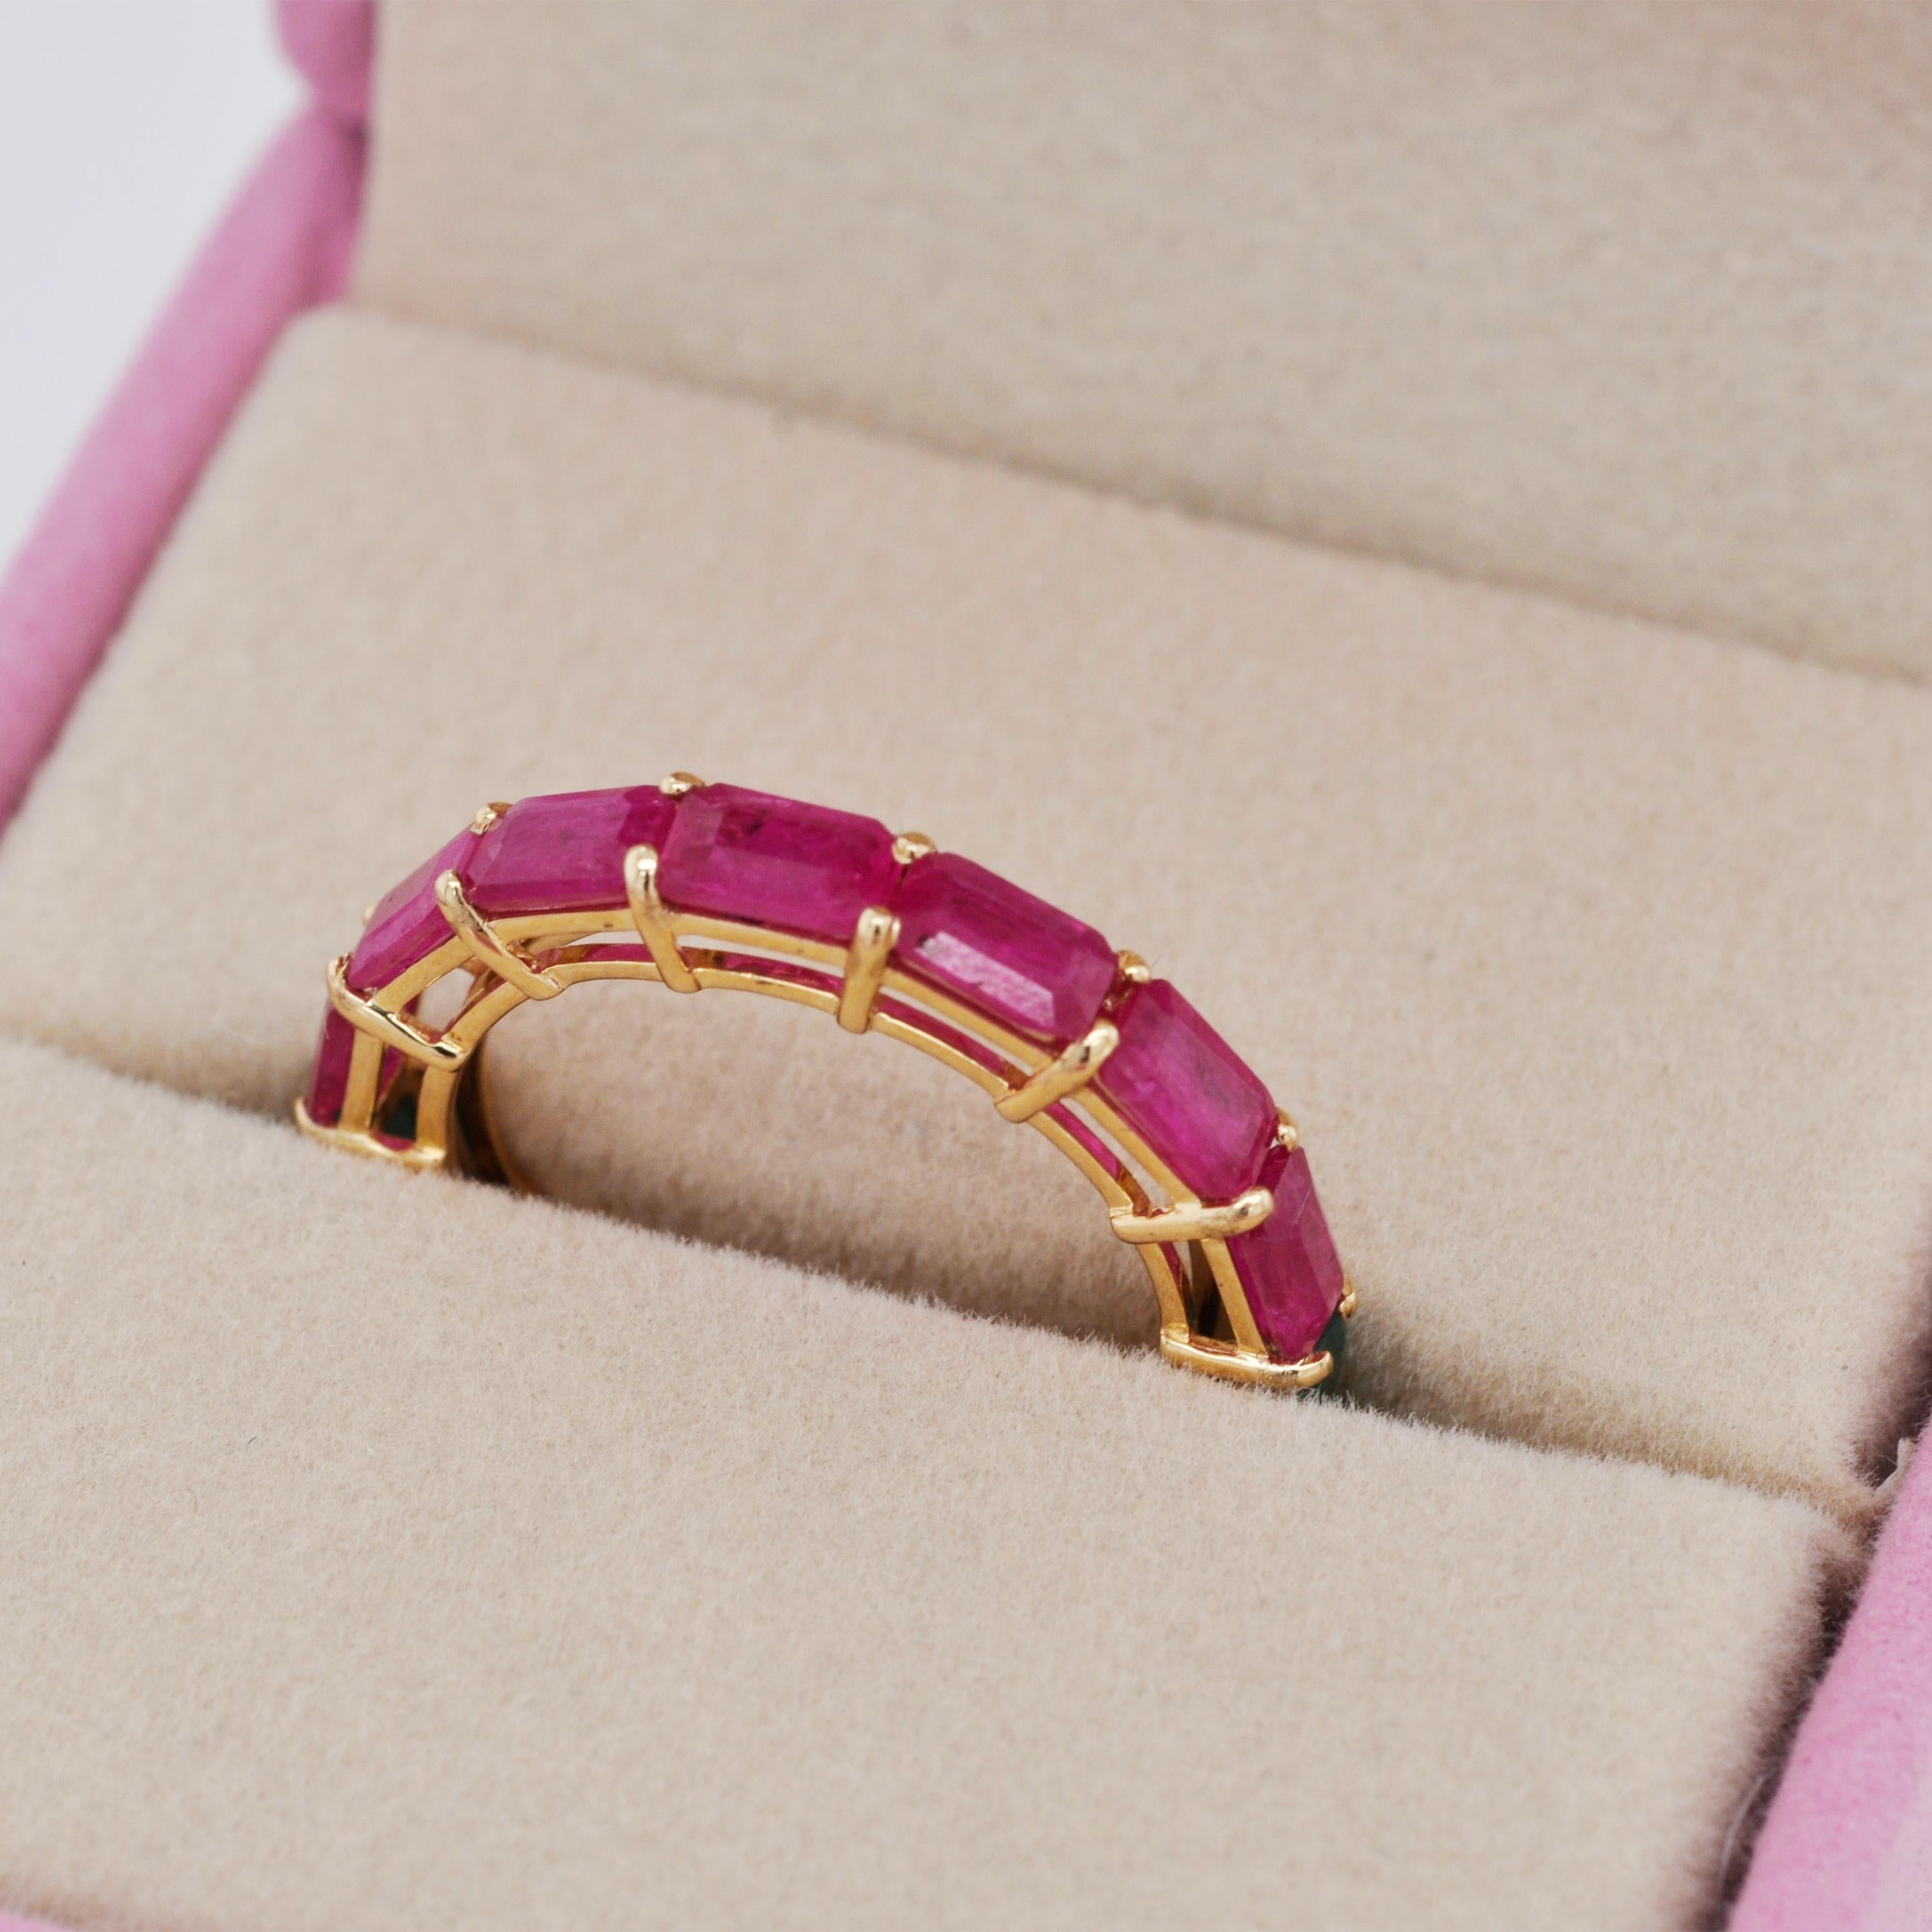 For Sale:  18K Yellow Gold Zambian Emerald Mozambique Ruby 5x3 MM Octagon Eternity Ring 9